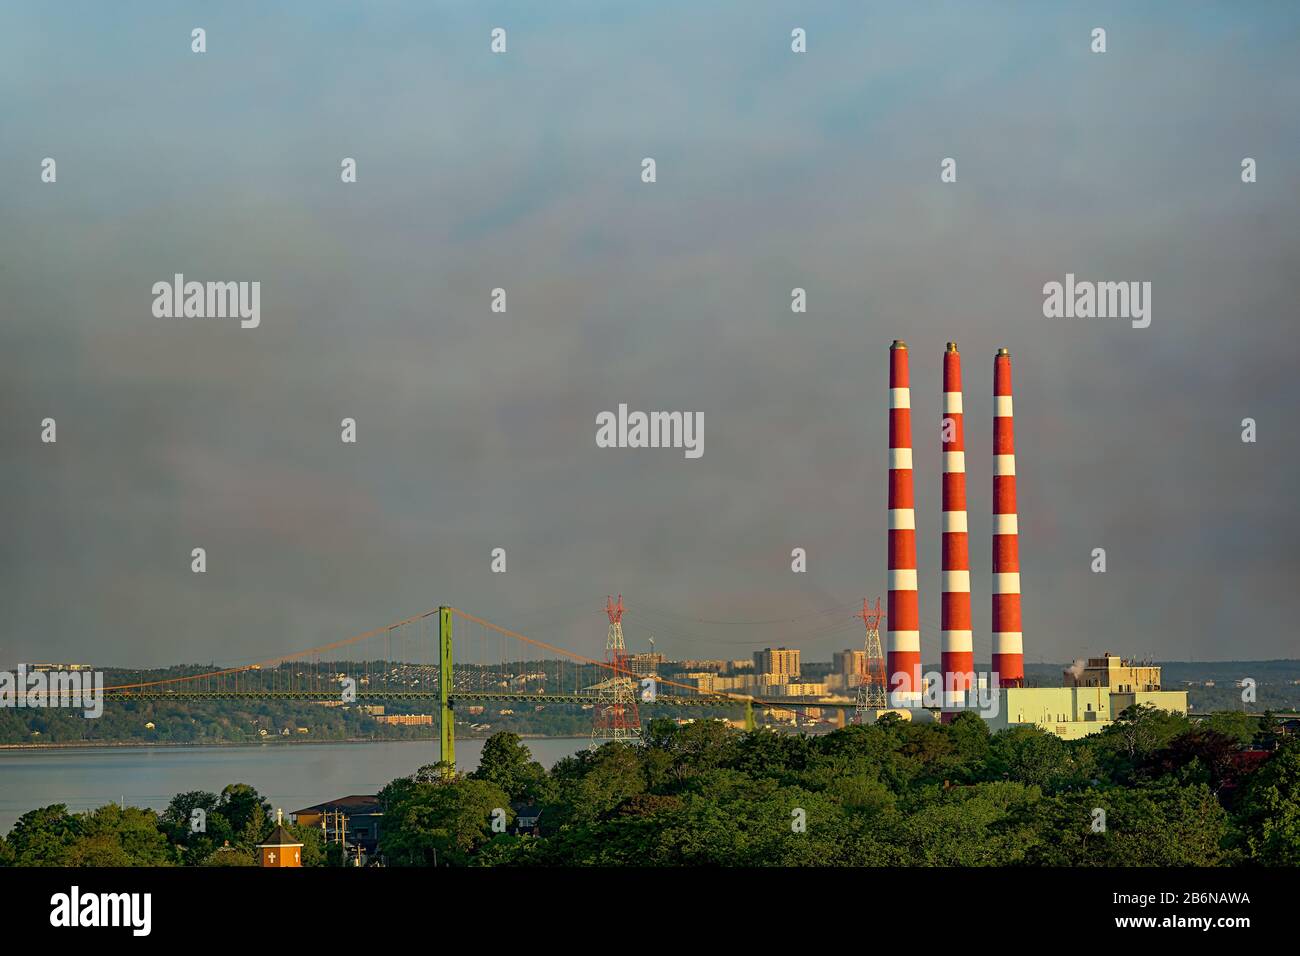 View over Halifax Harbour, Nova Scotia, Canada from the Dartmouth side looking over the A. Murray MacKay Bridge which is locally known as the 'New Bri Stock Photo